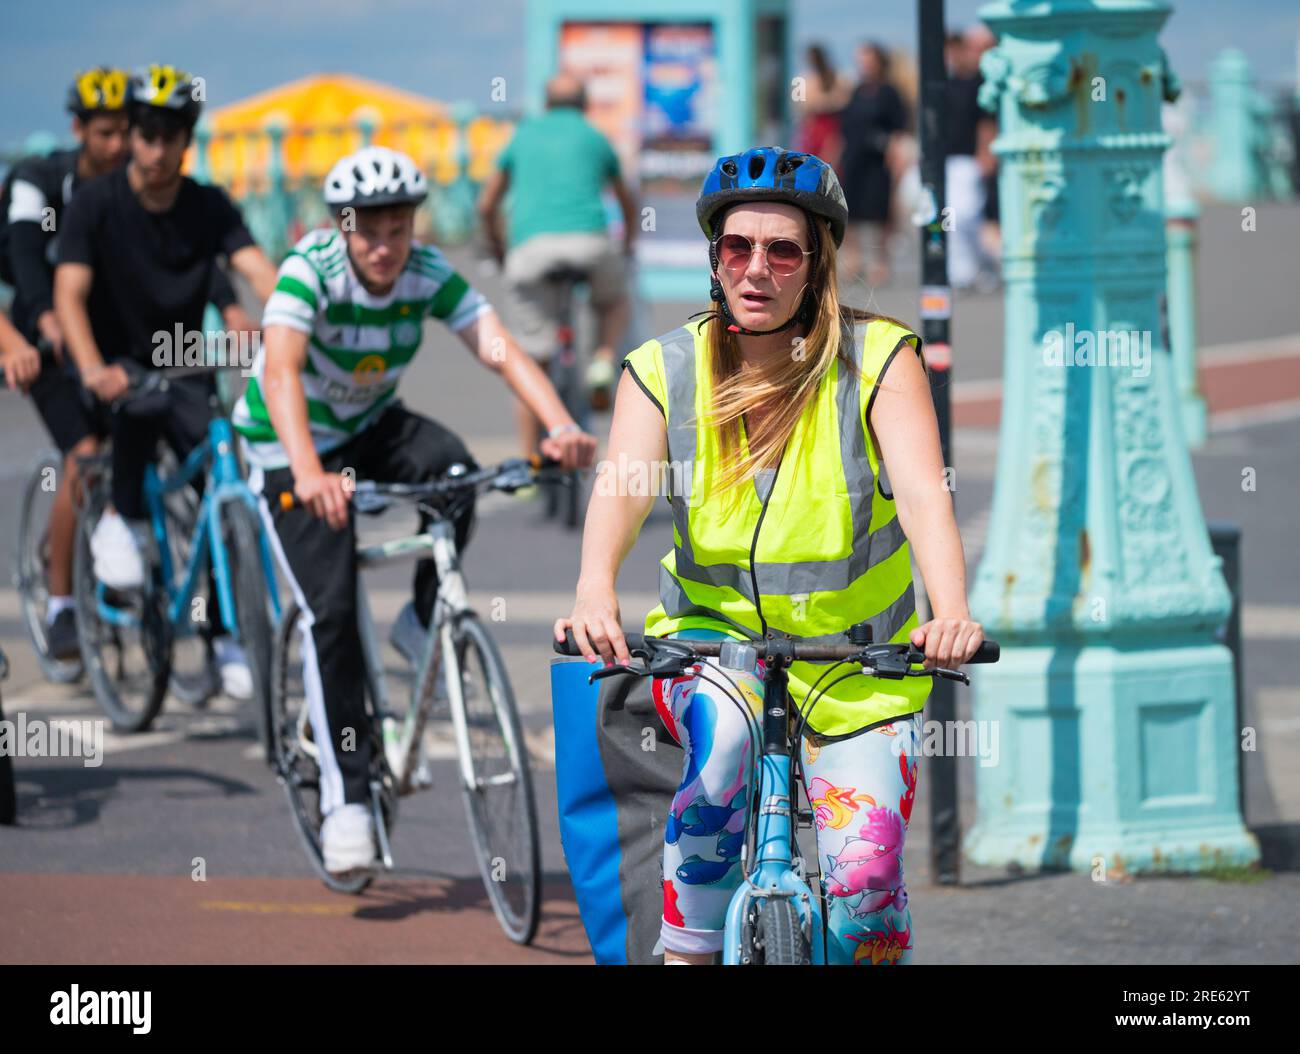 Group of cyclists riding bicycles in a cycle lane on the seafront promenade at Brighton, Brighton & Hove, East Sussex, England, UK. Stock Photo